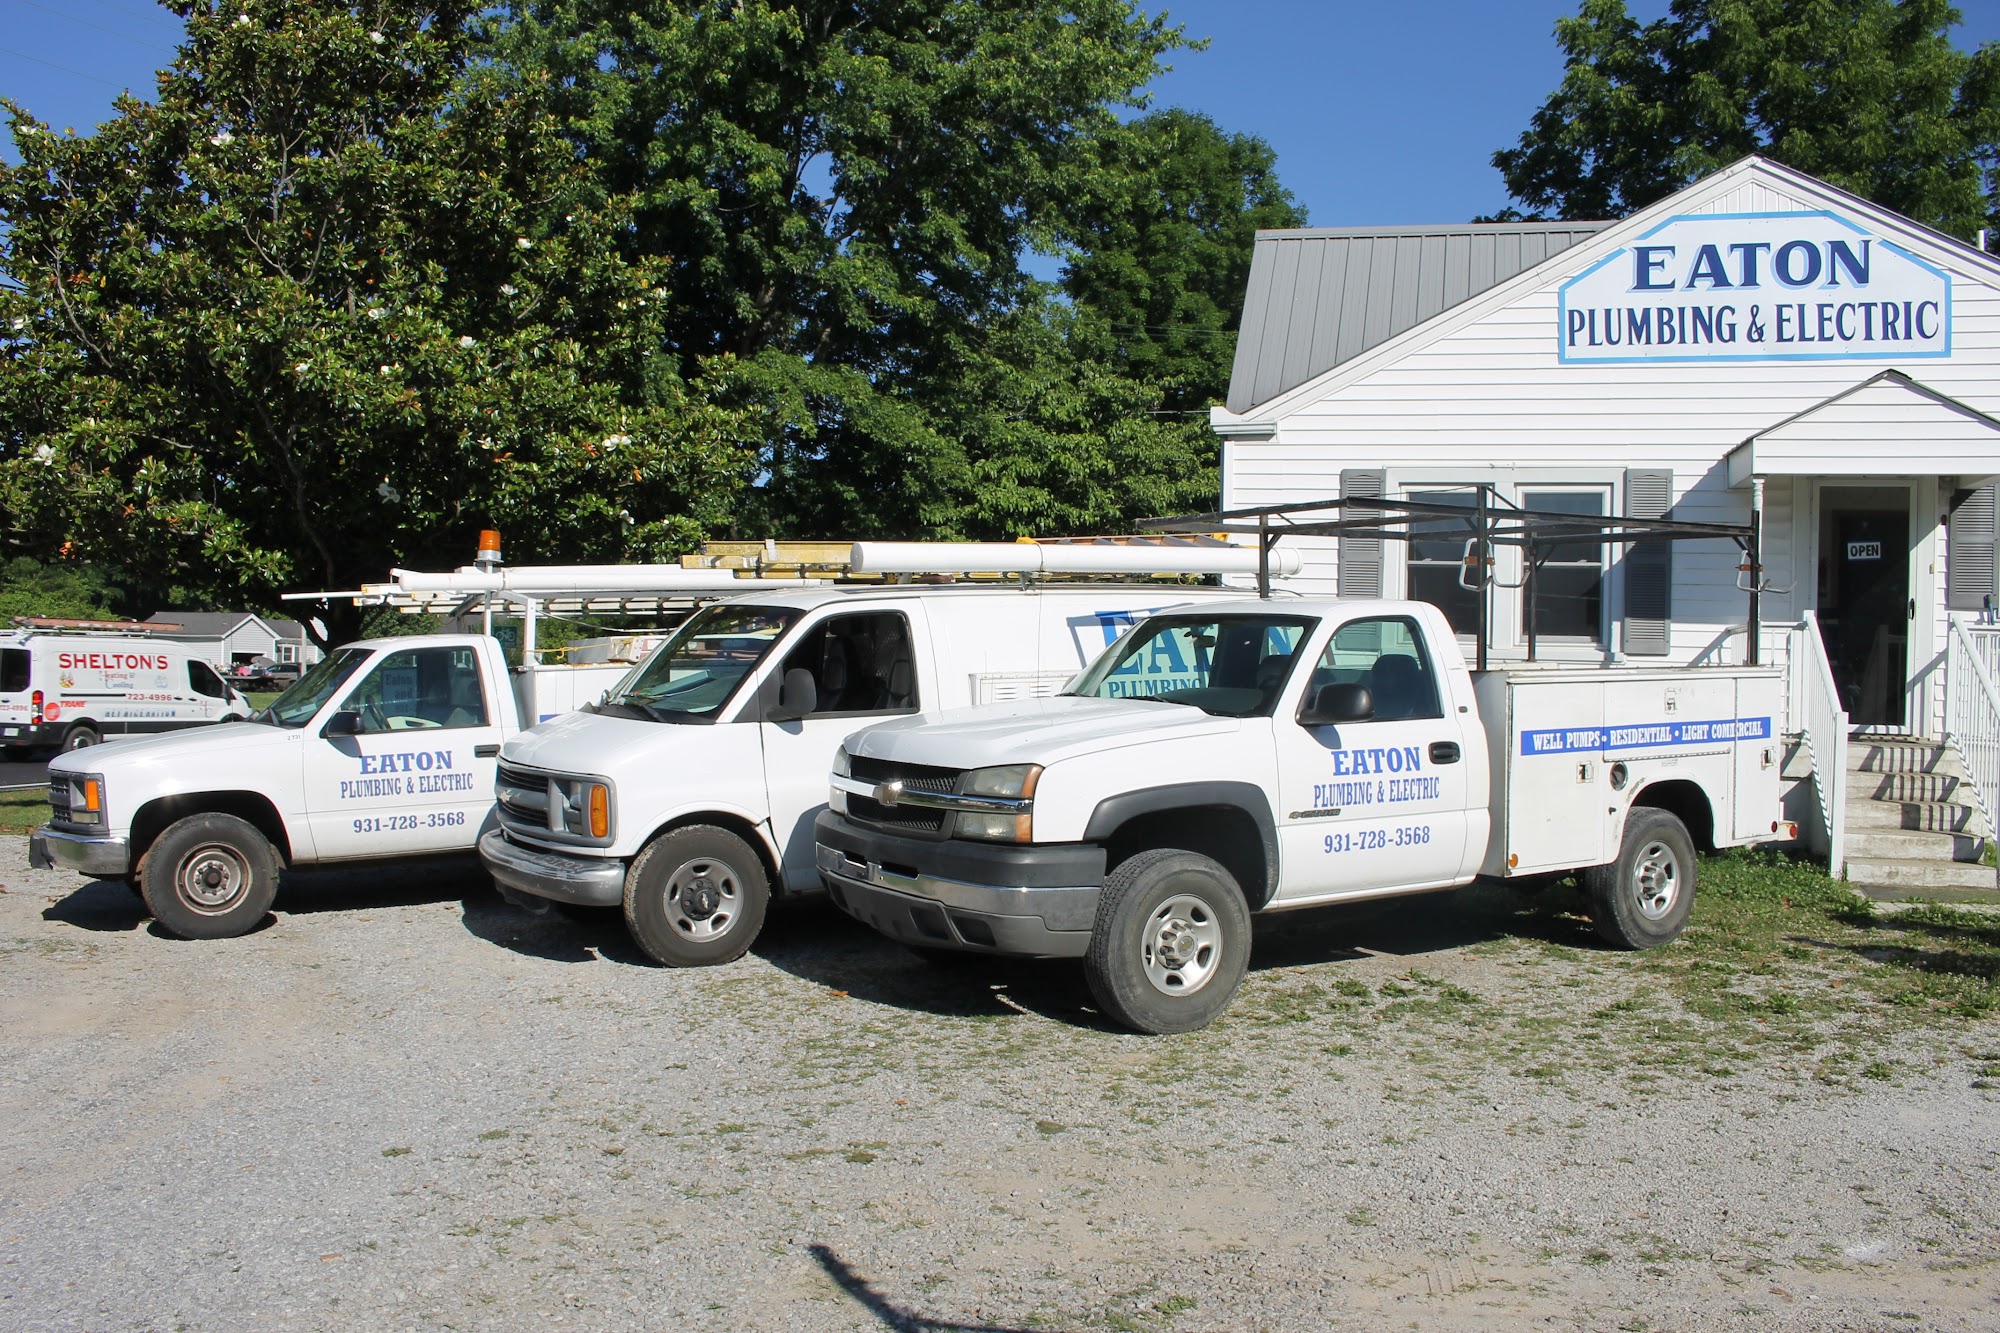 Eaton Plumbing and Electrical Services